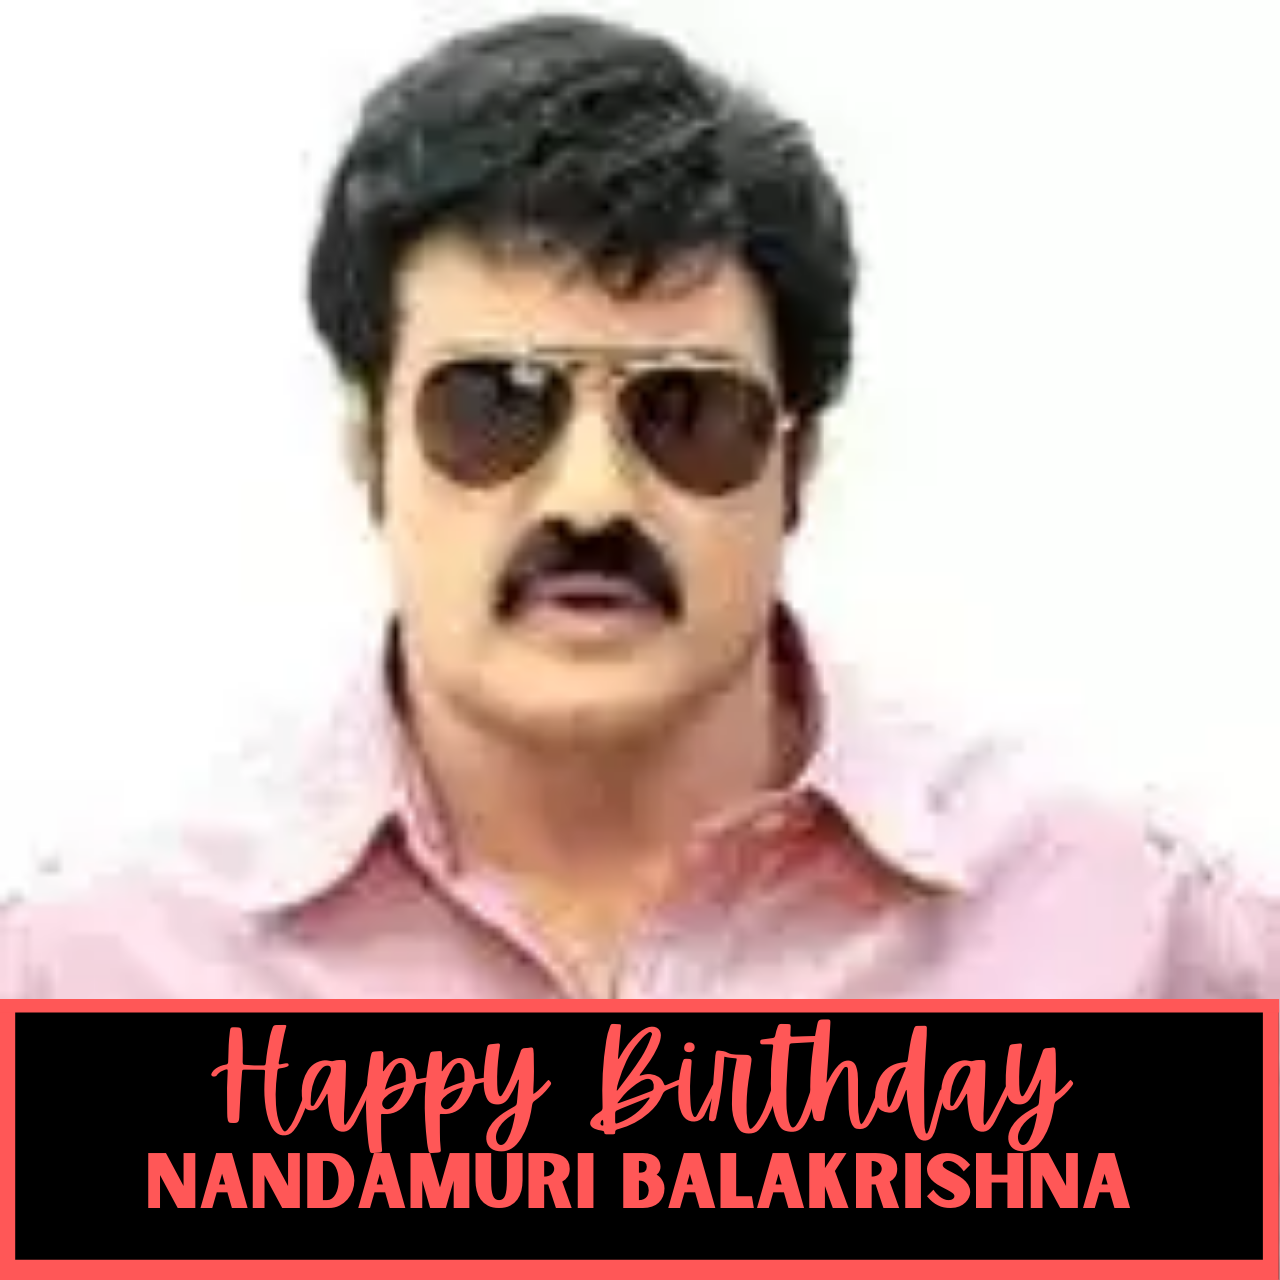 Happy Birthday Nandamuri Balakrishna: Images (photos), Wishes, Messages, and WhatsApp Status Song Video Download